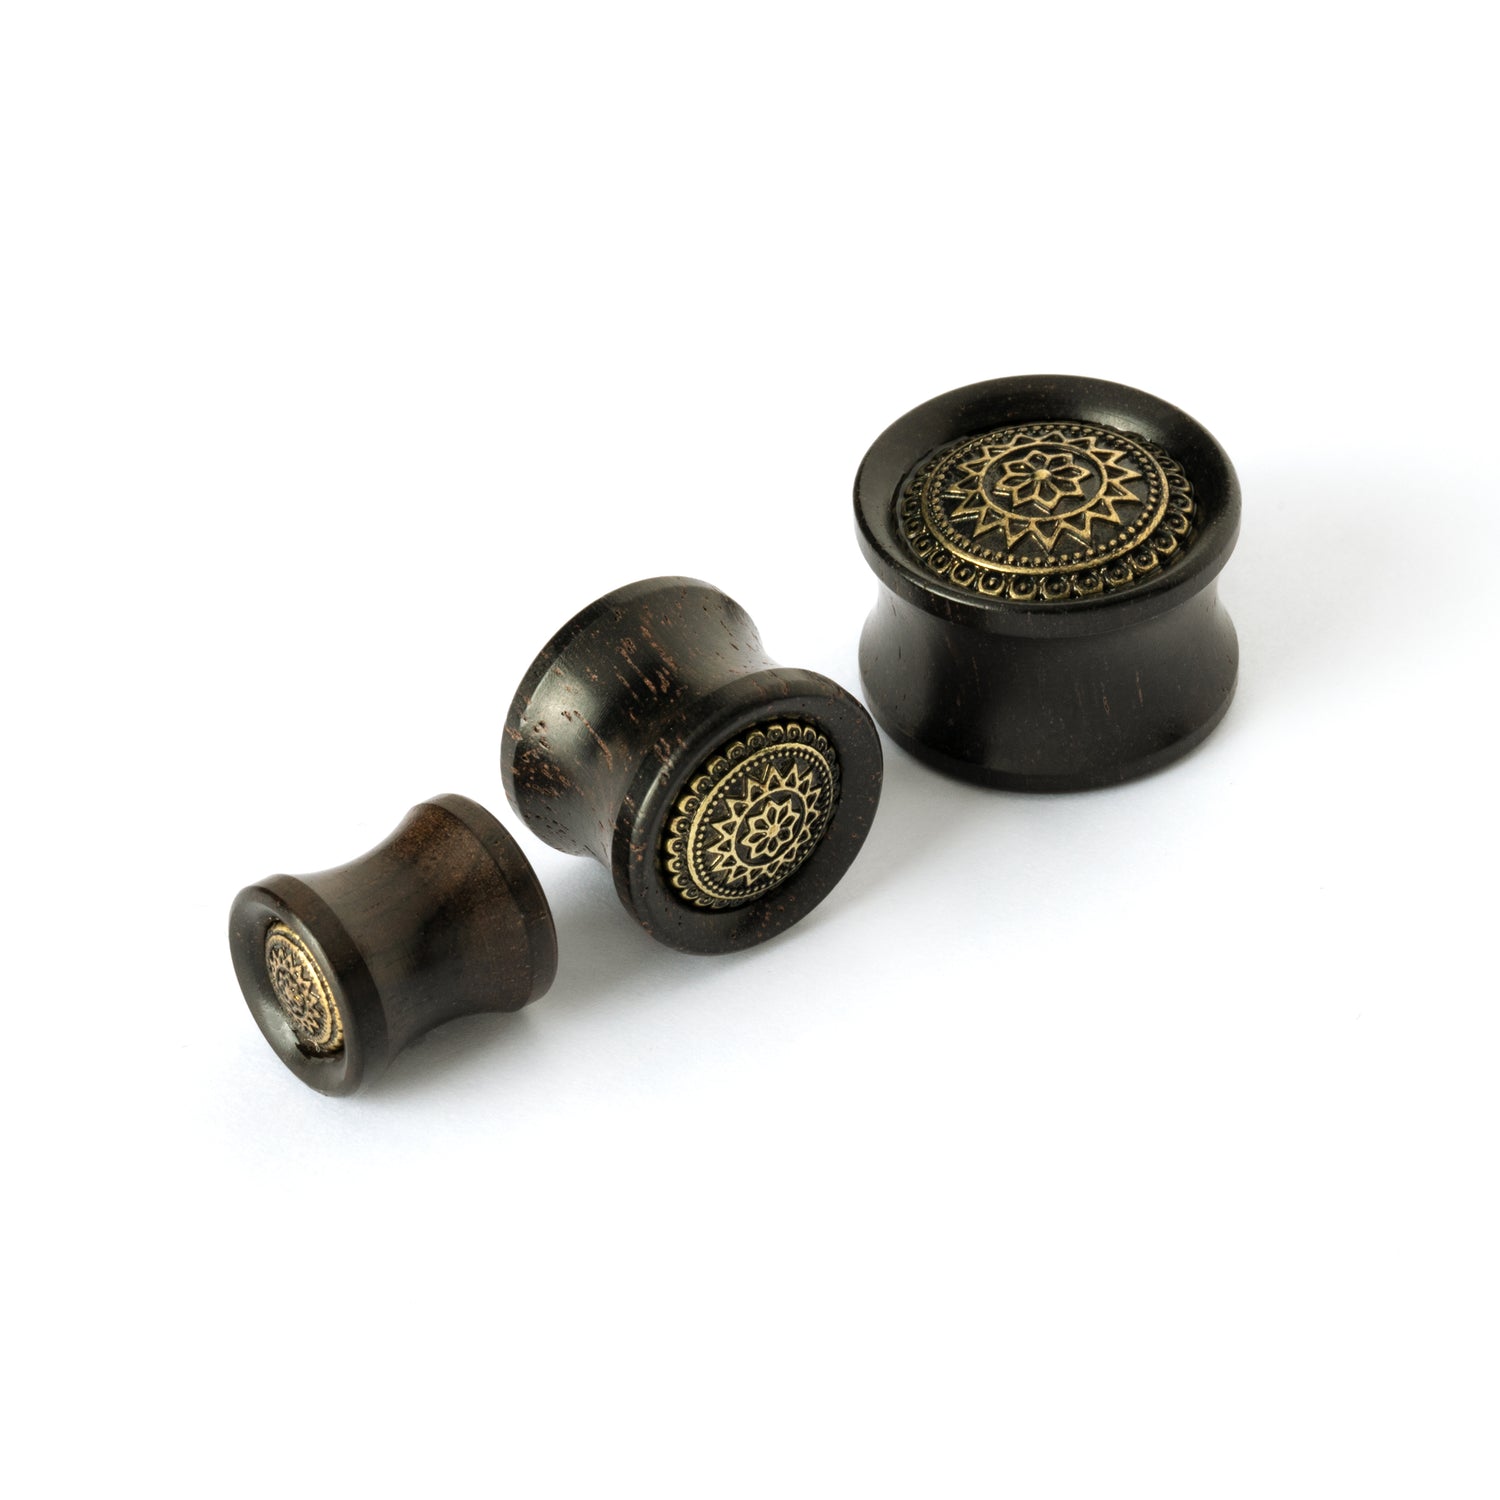 different sizes of ebony wood ear plugs with brass tribal flower ornament